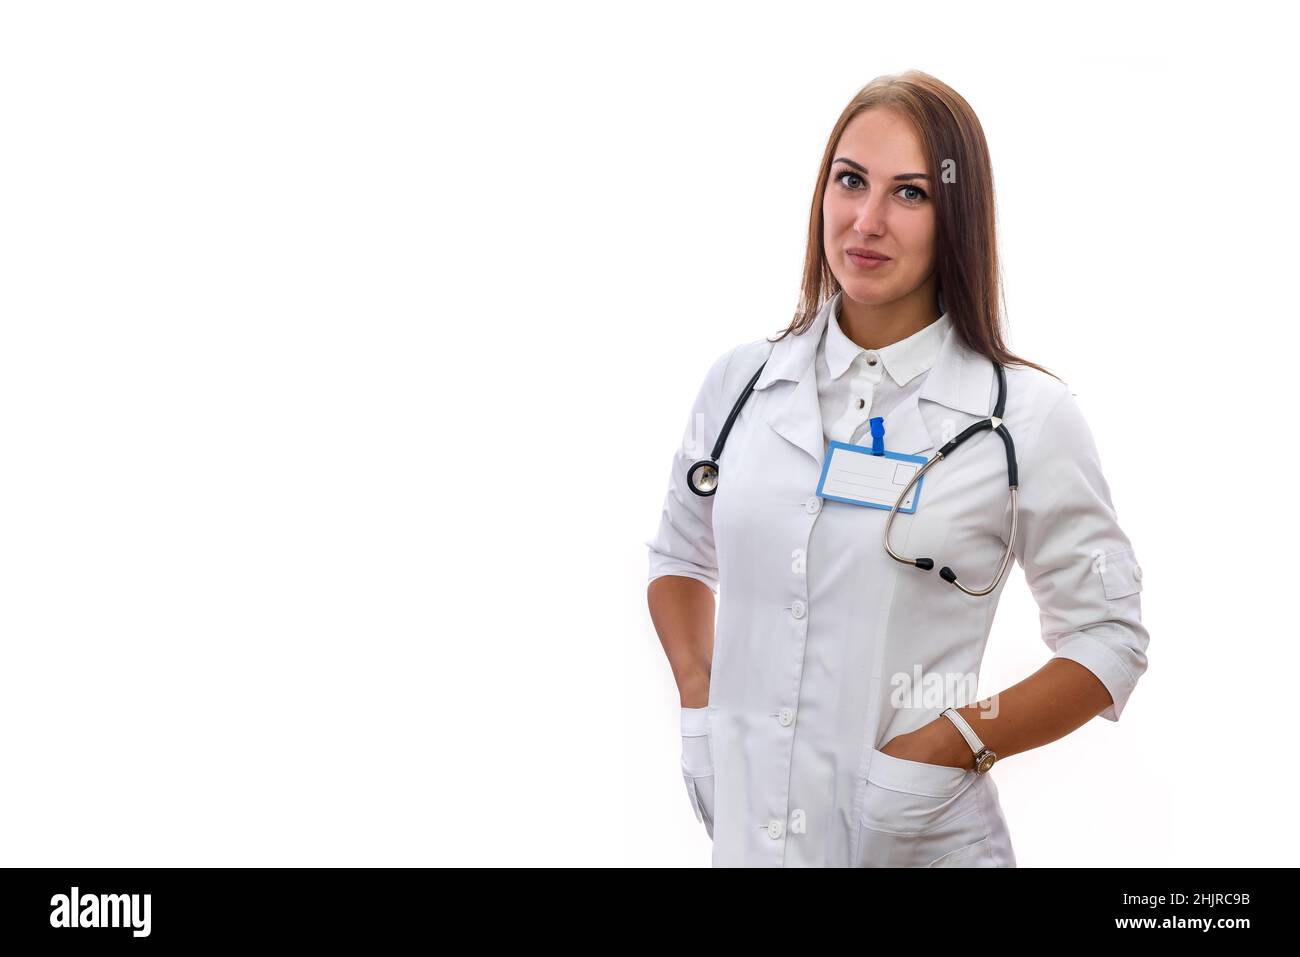 Smiling woman in white medical coat posing with stethoscope isolated on white Stock Photo